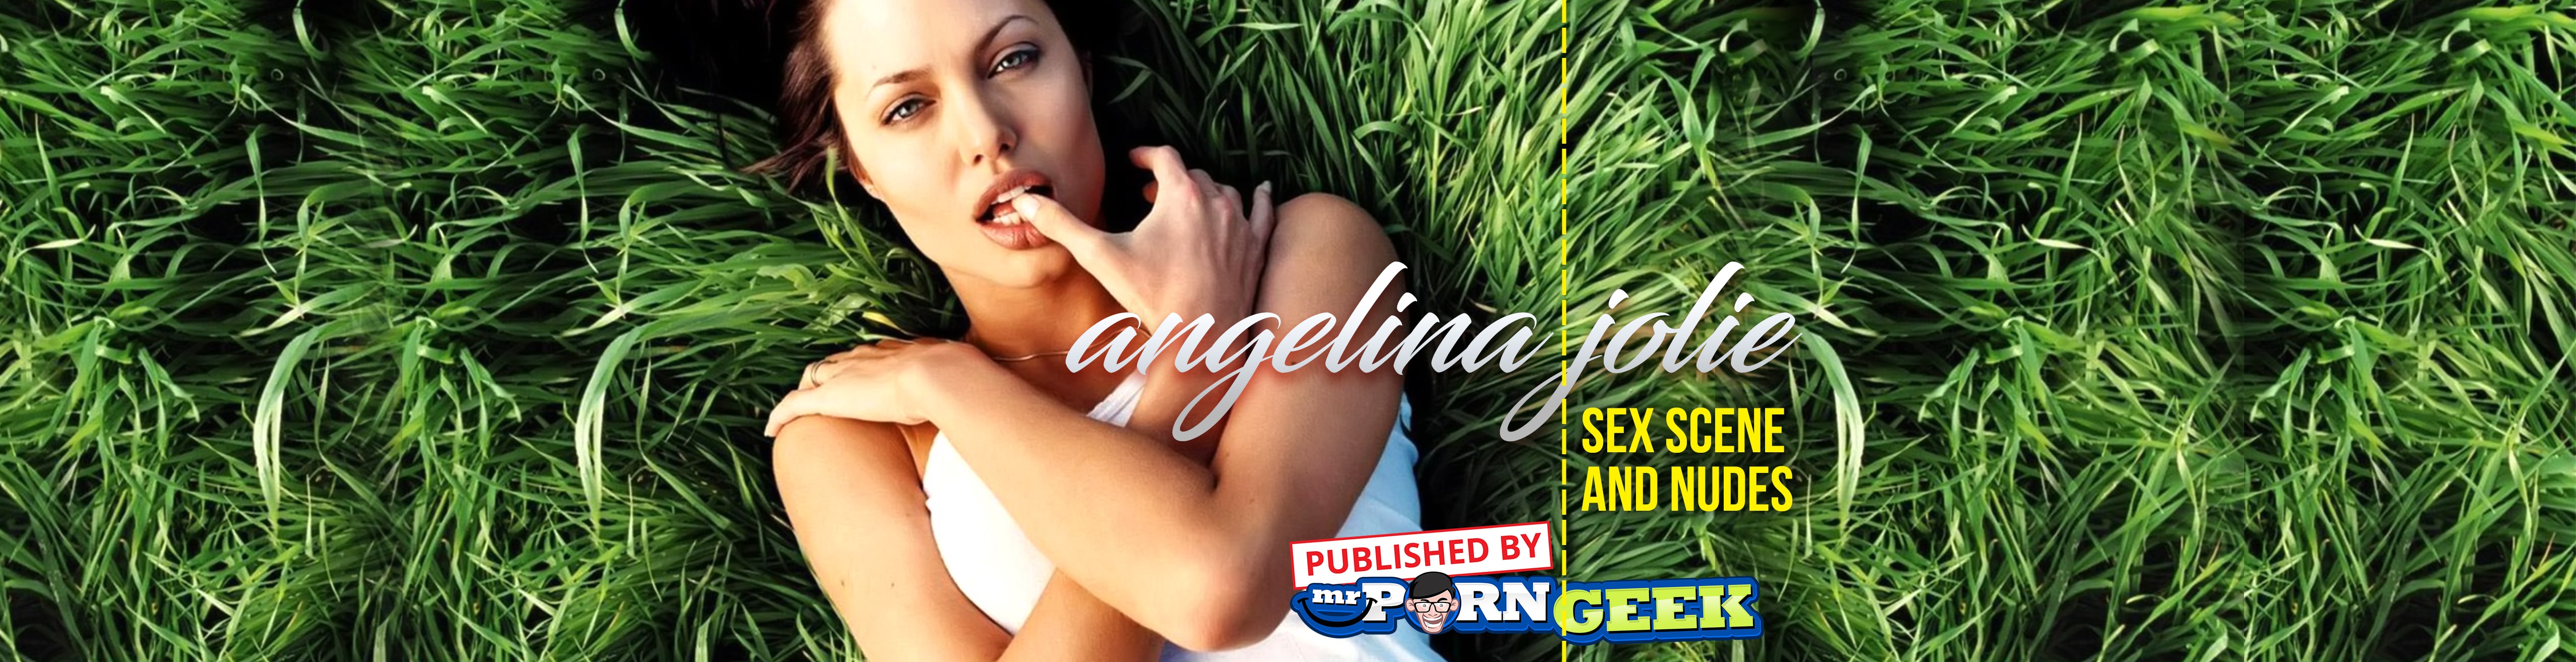 Get The Top Angelina Jolie Naked Sex Scene And Nudes At Mr Porn Geek